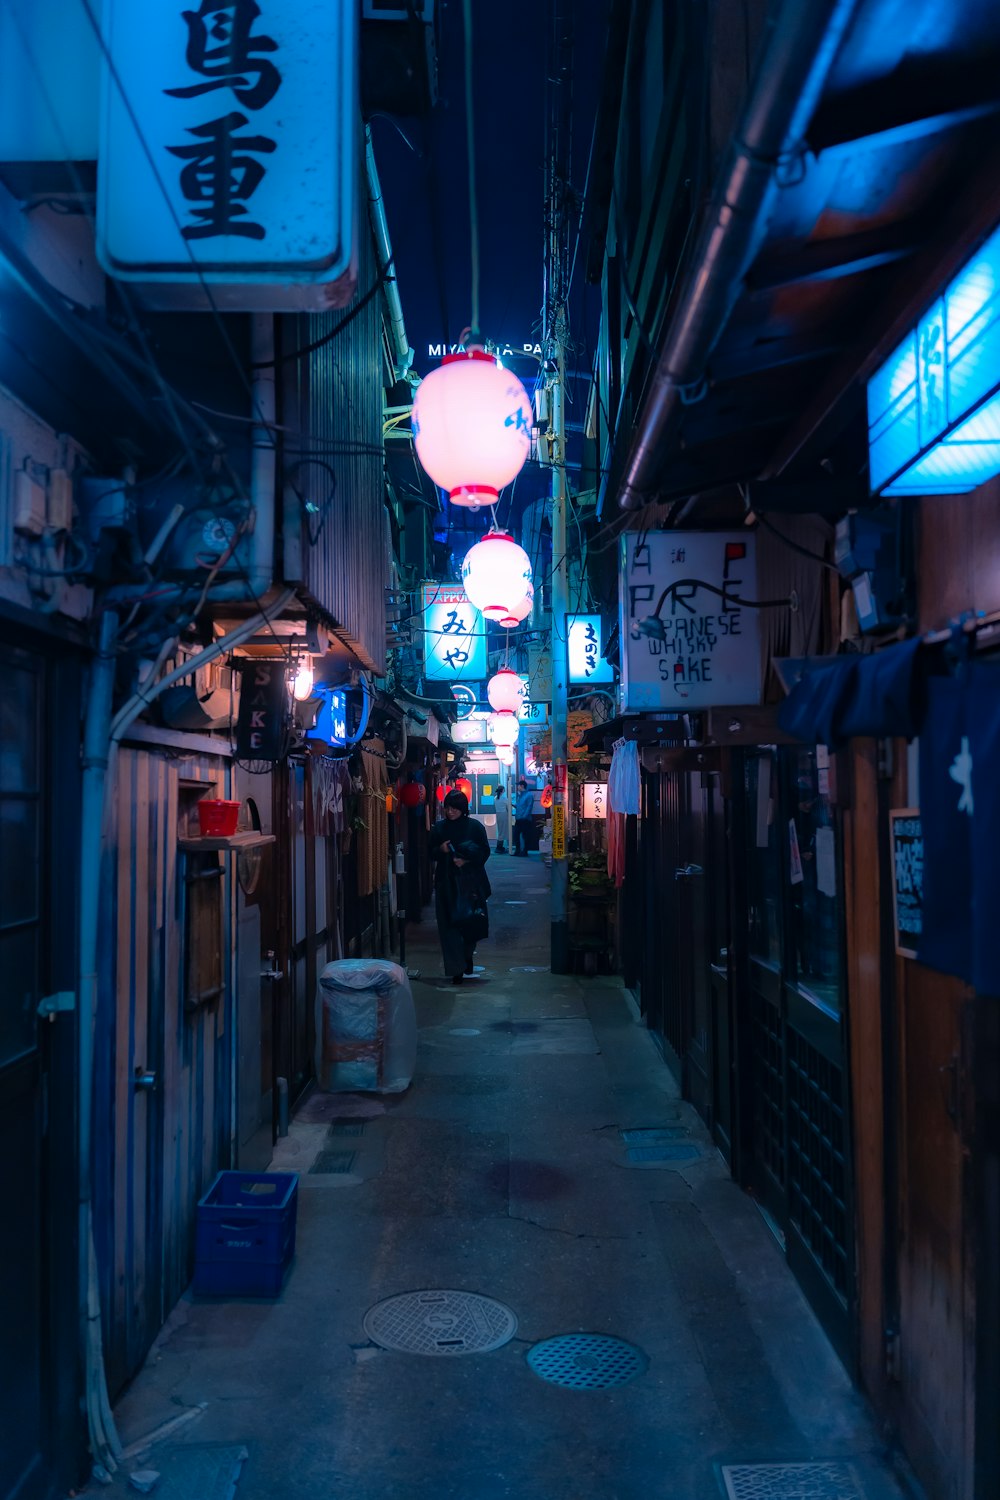 a narrow alley way with neon signs hanging from the ceiling